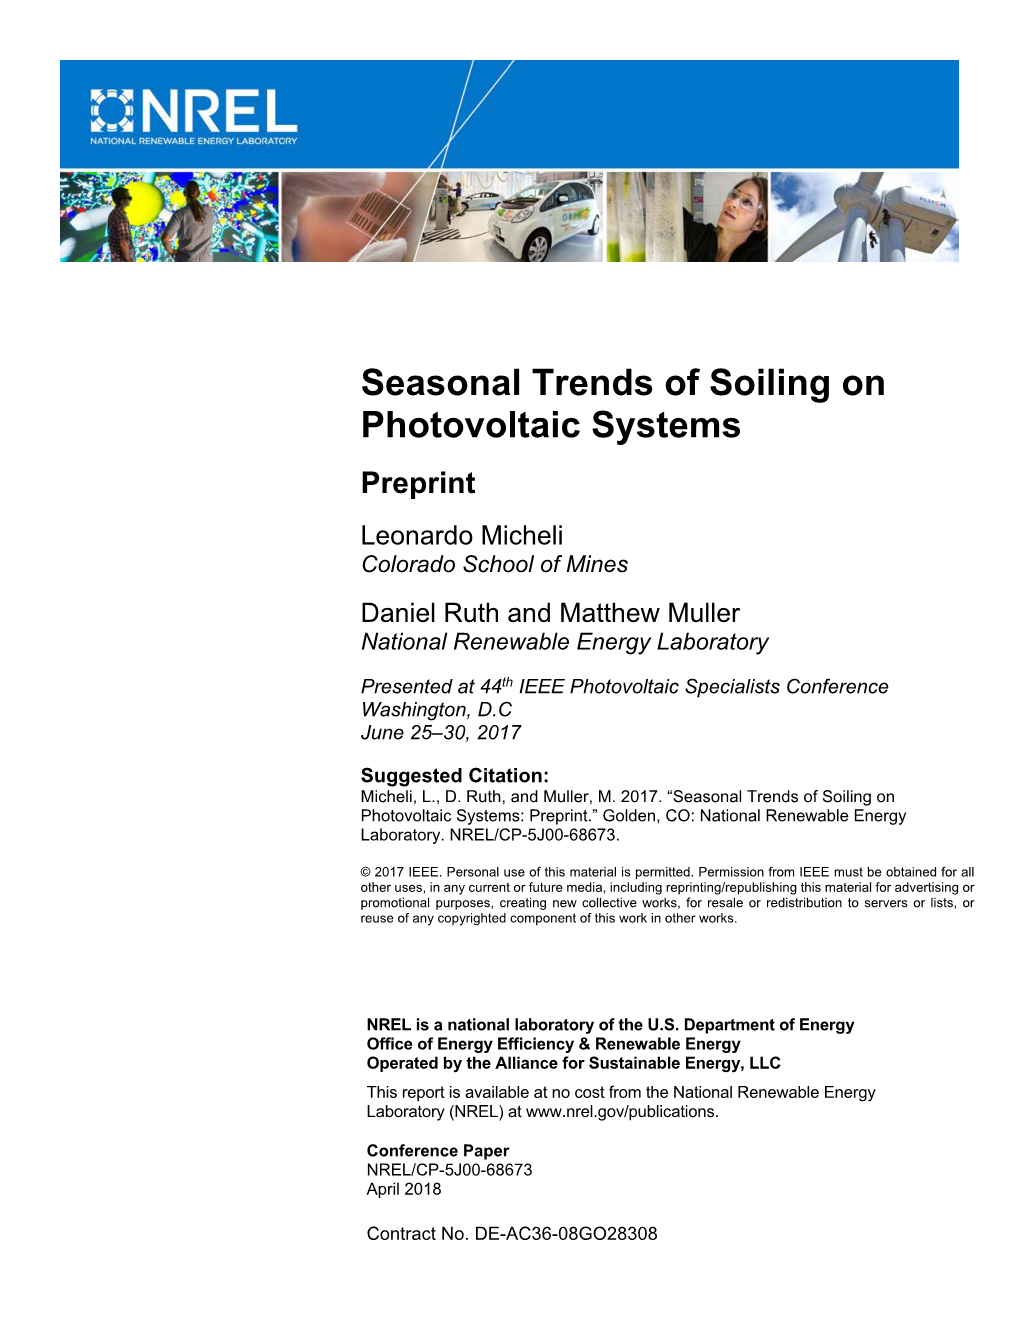 Seasonal Trends of Soiling on Photovoltaic Systems